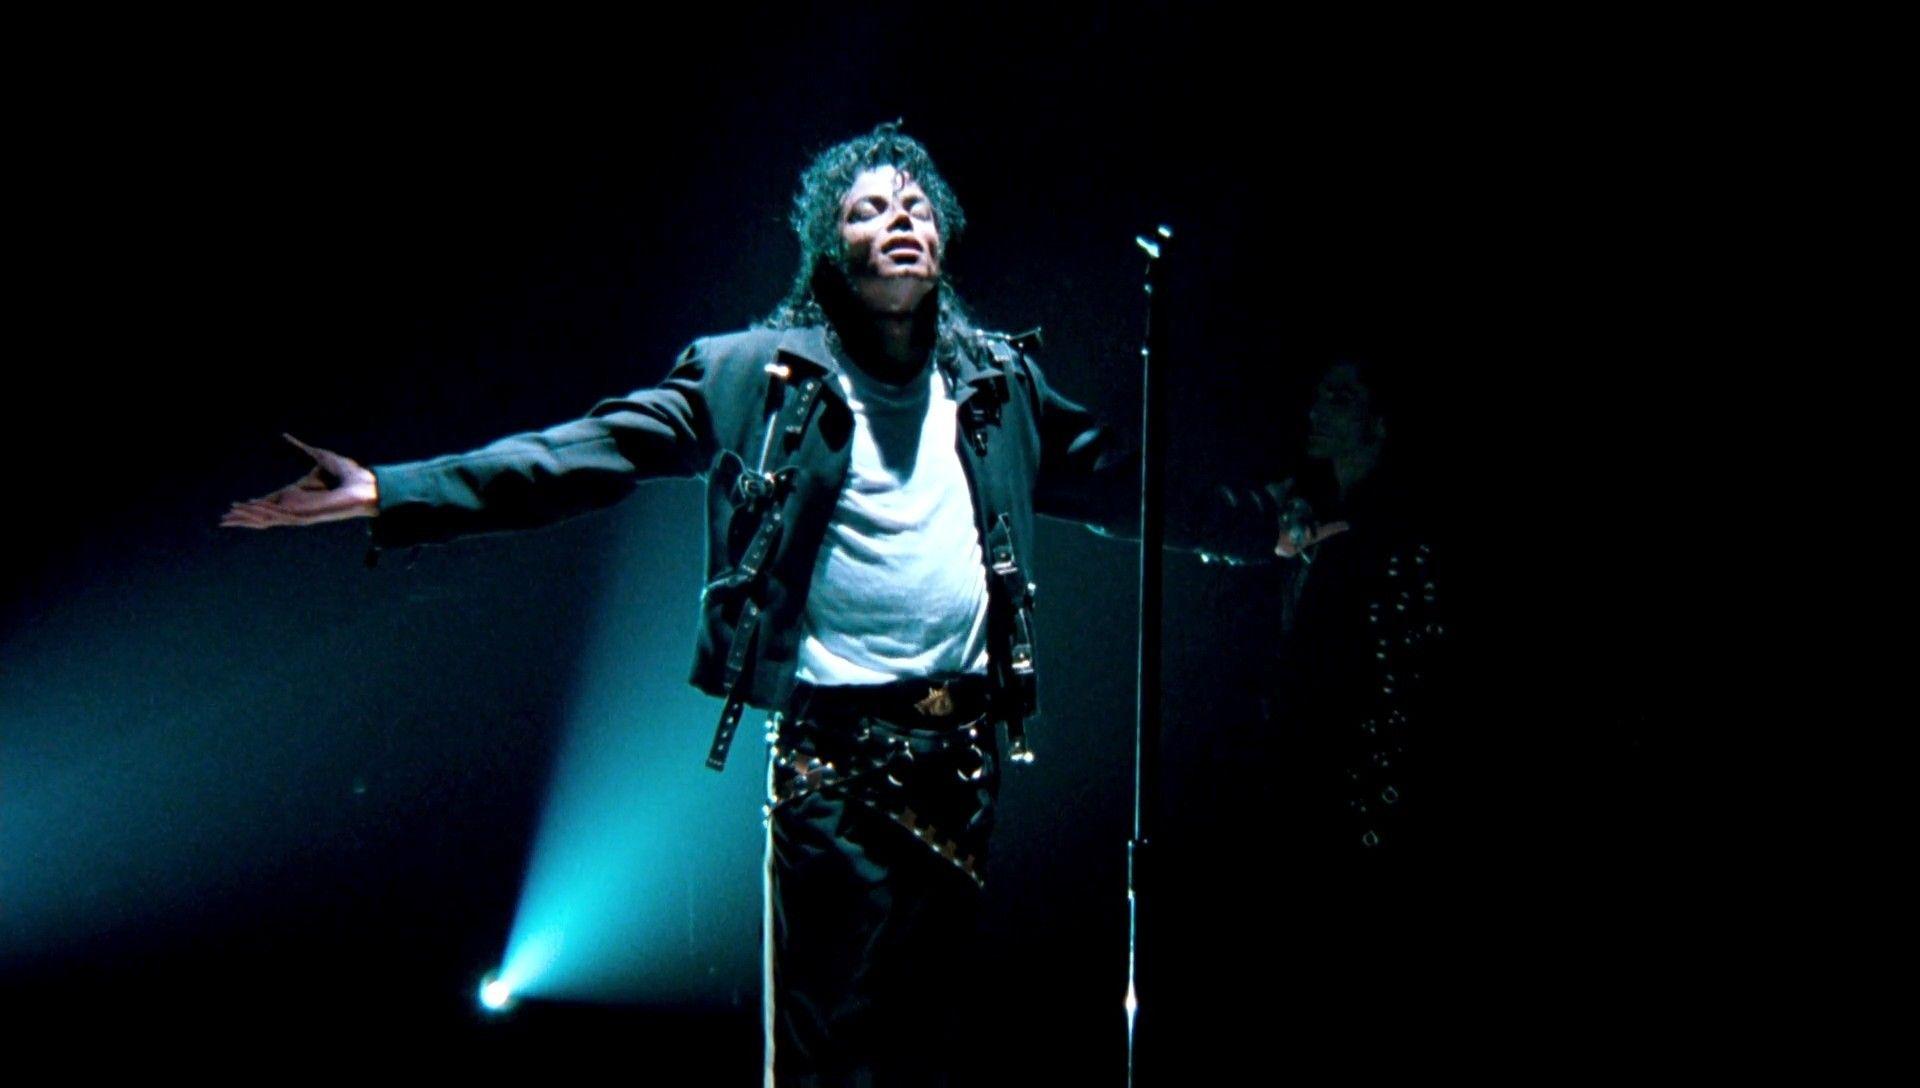 Michael Jackson Bw Concert King Of Pop iPhone Wallpapers Free Download